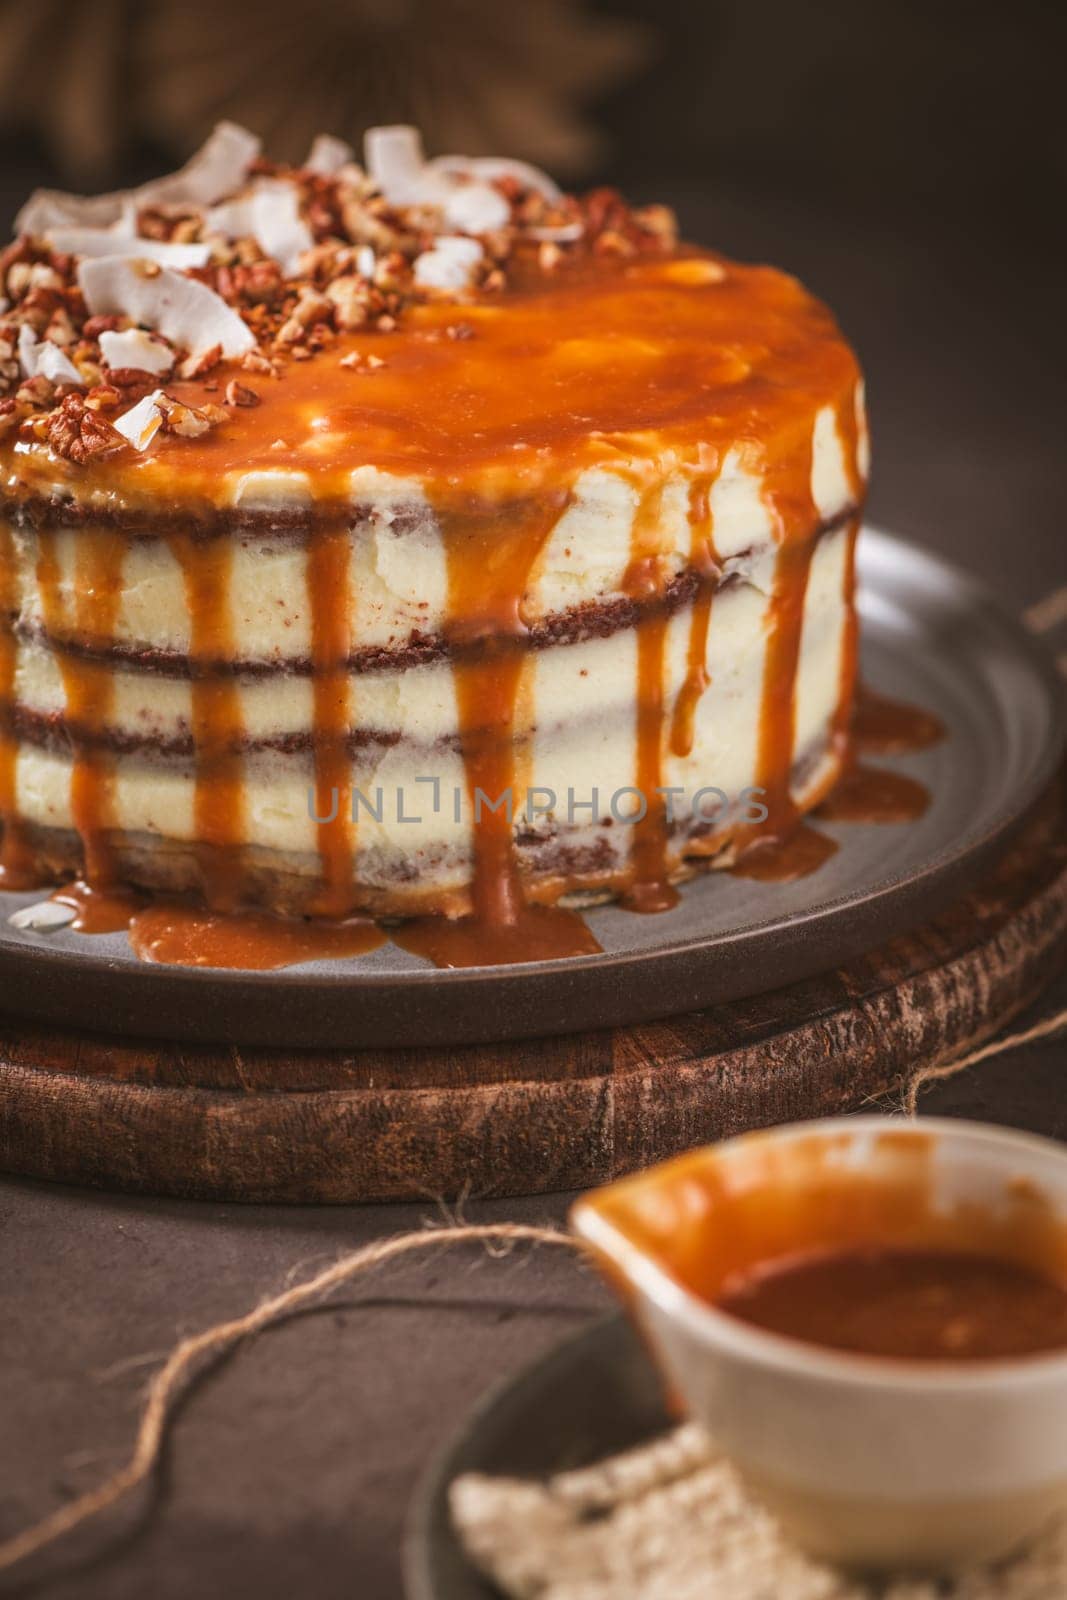 Delicious caramel cake with small pieces of pecan nuts and coconut shavings.